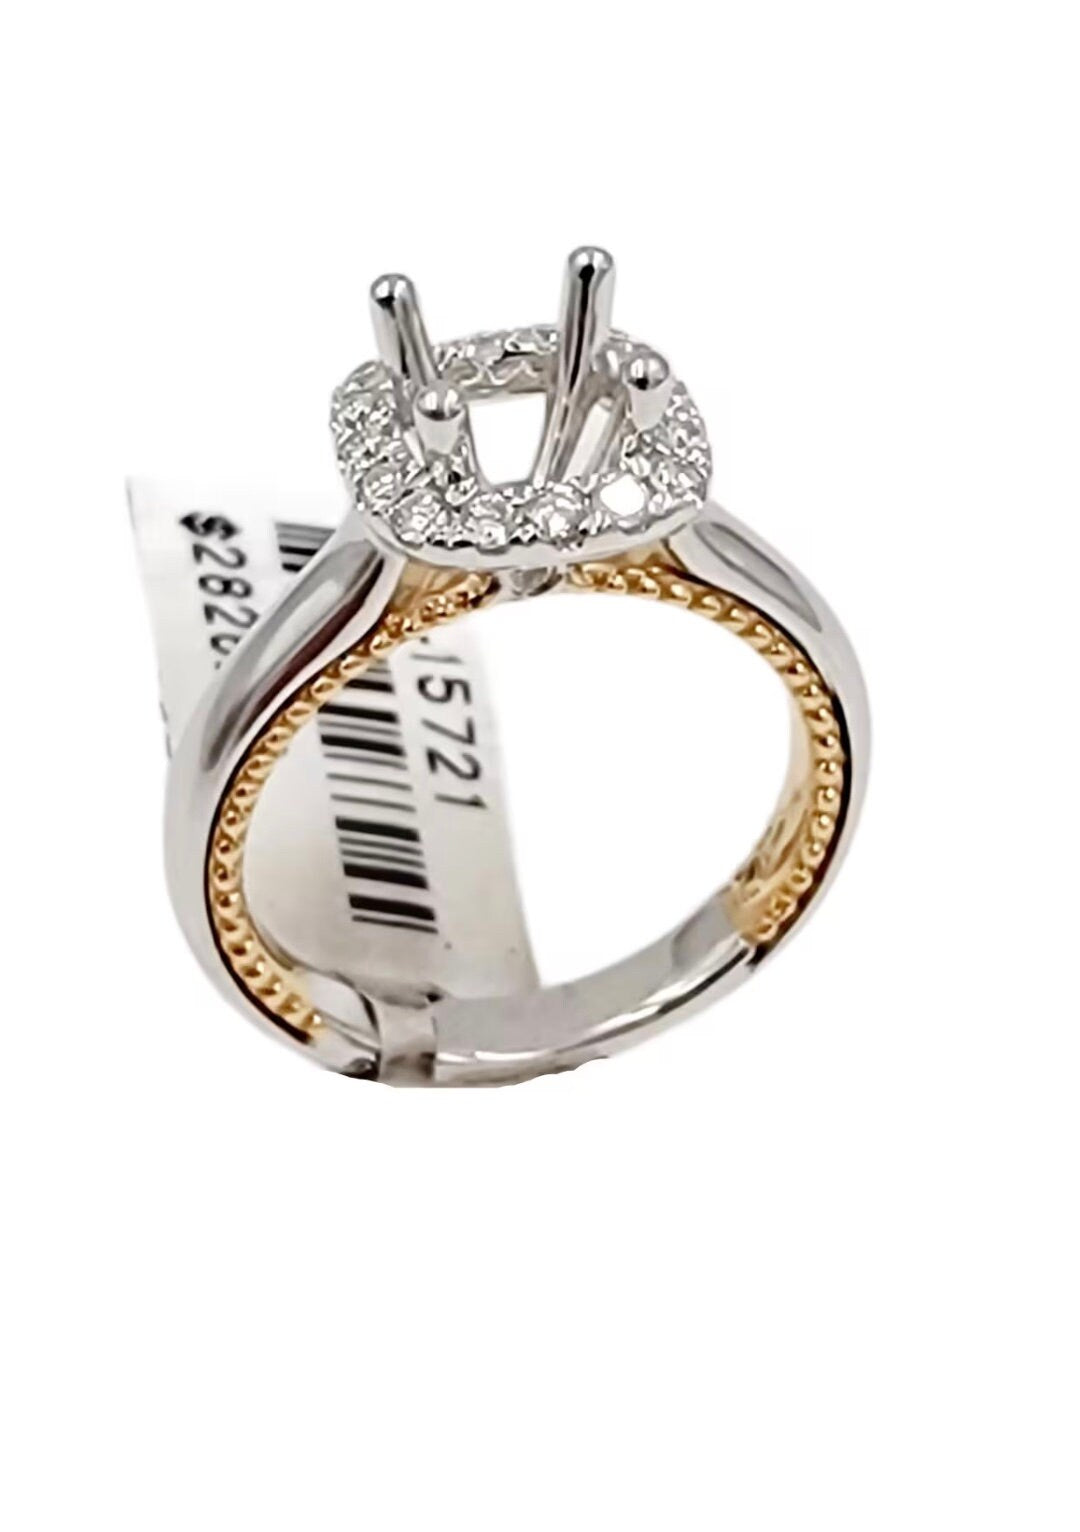 18k Two Tone Semi Mount Ring. White and Rose gold